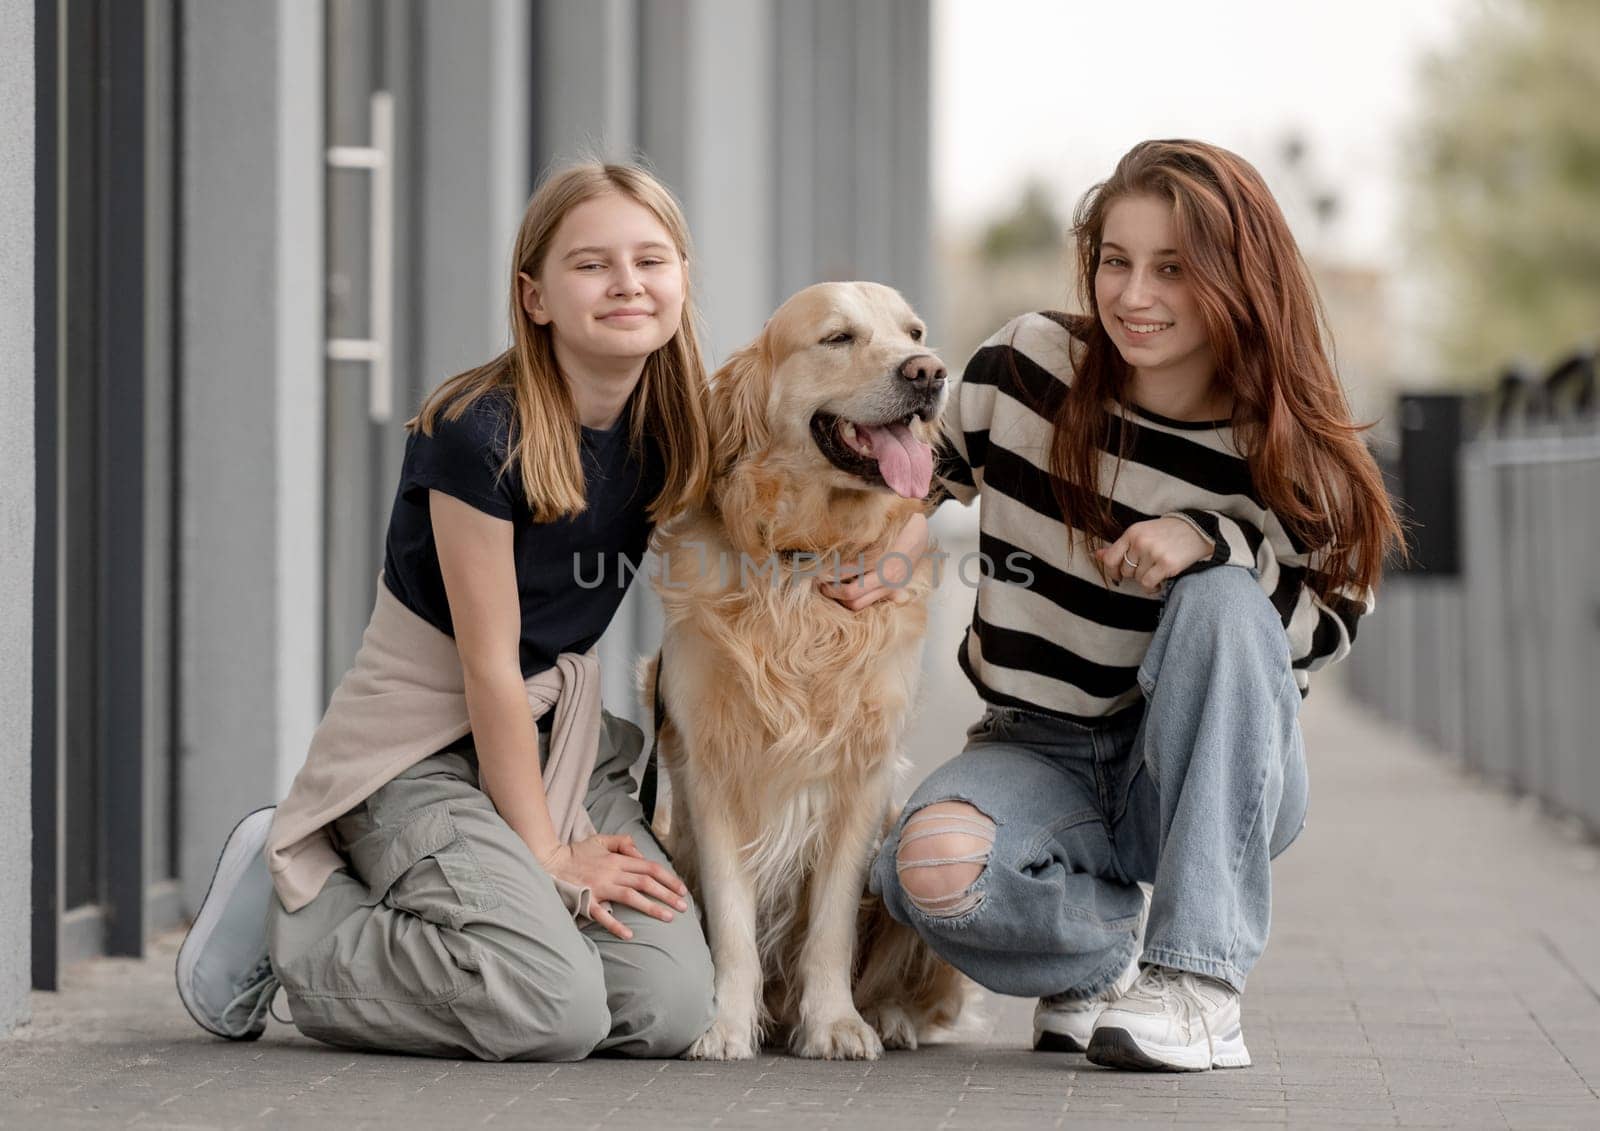 Two Girls Playing With Golden Retriever Outside by tan4ikk1